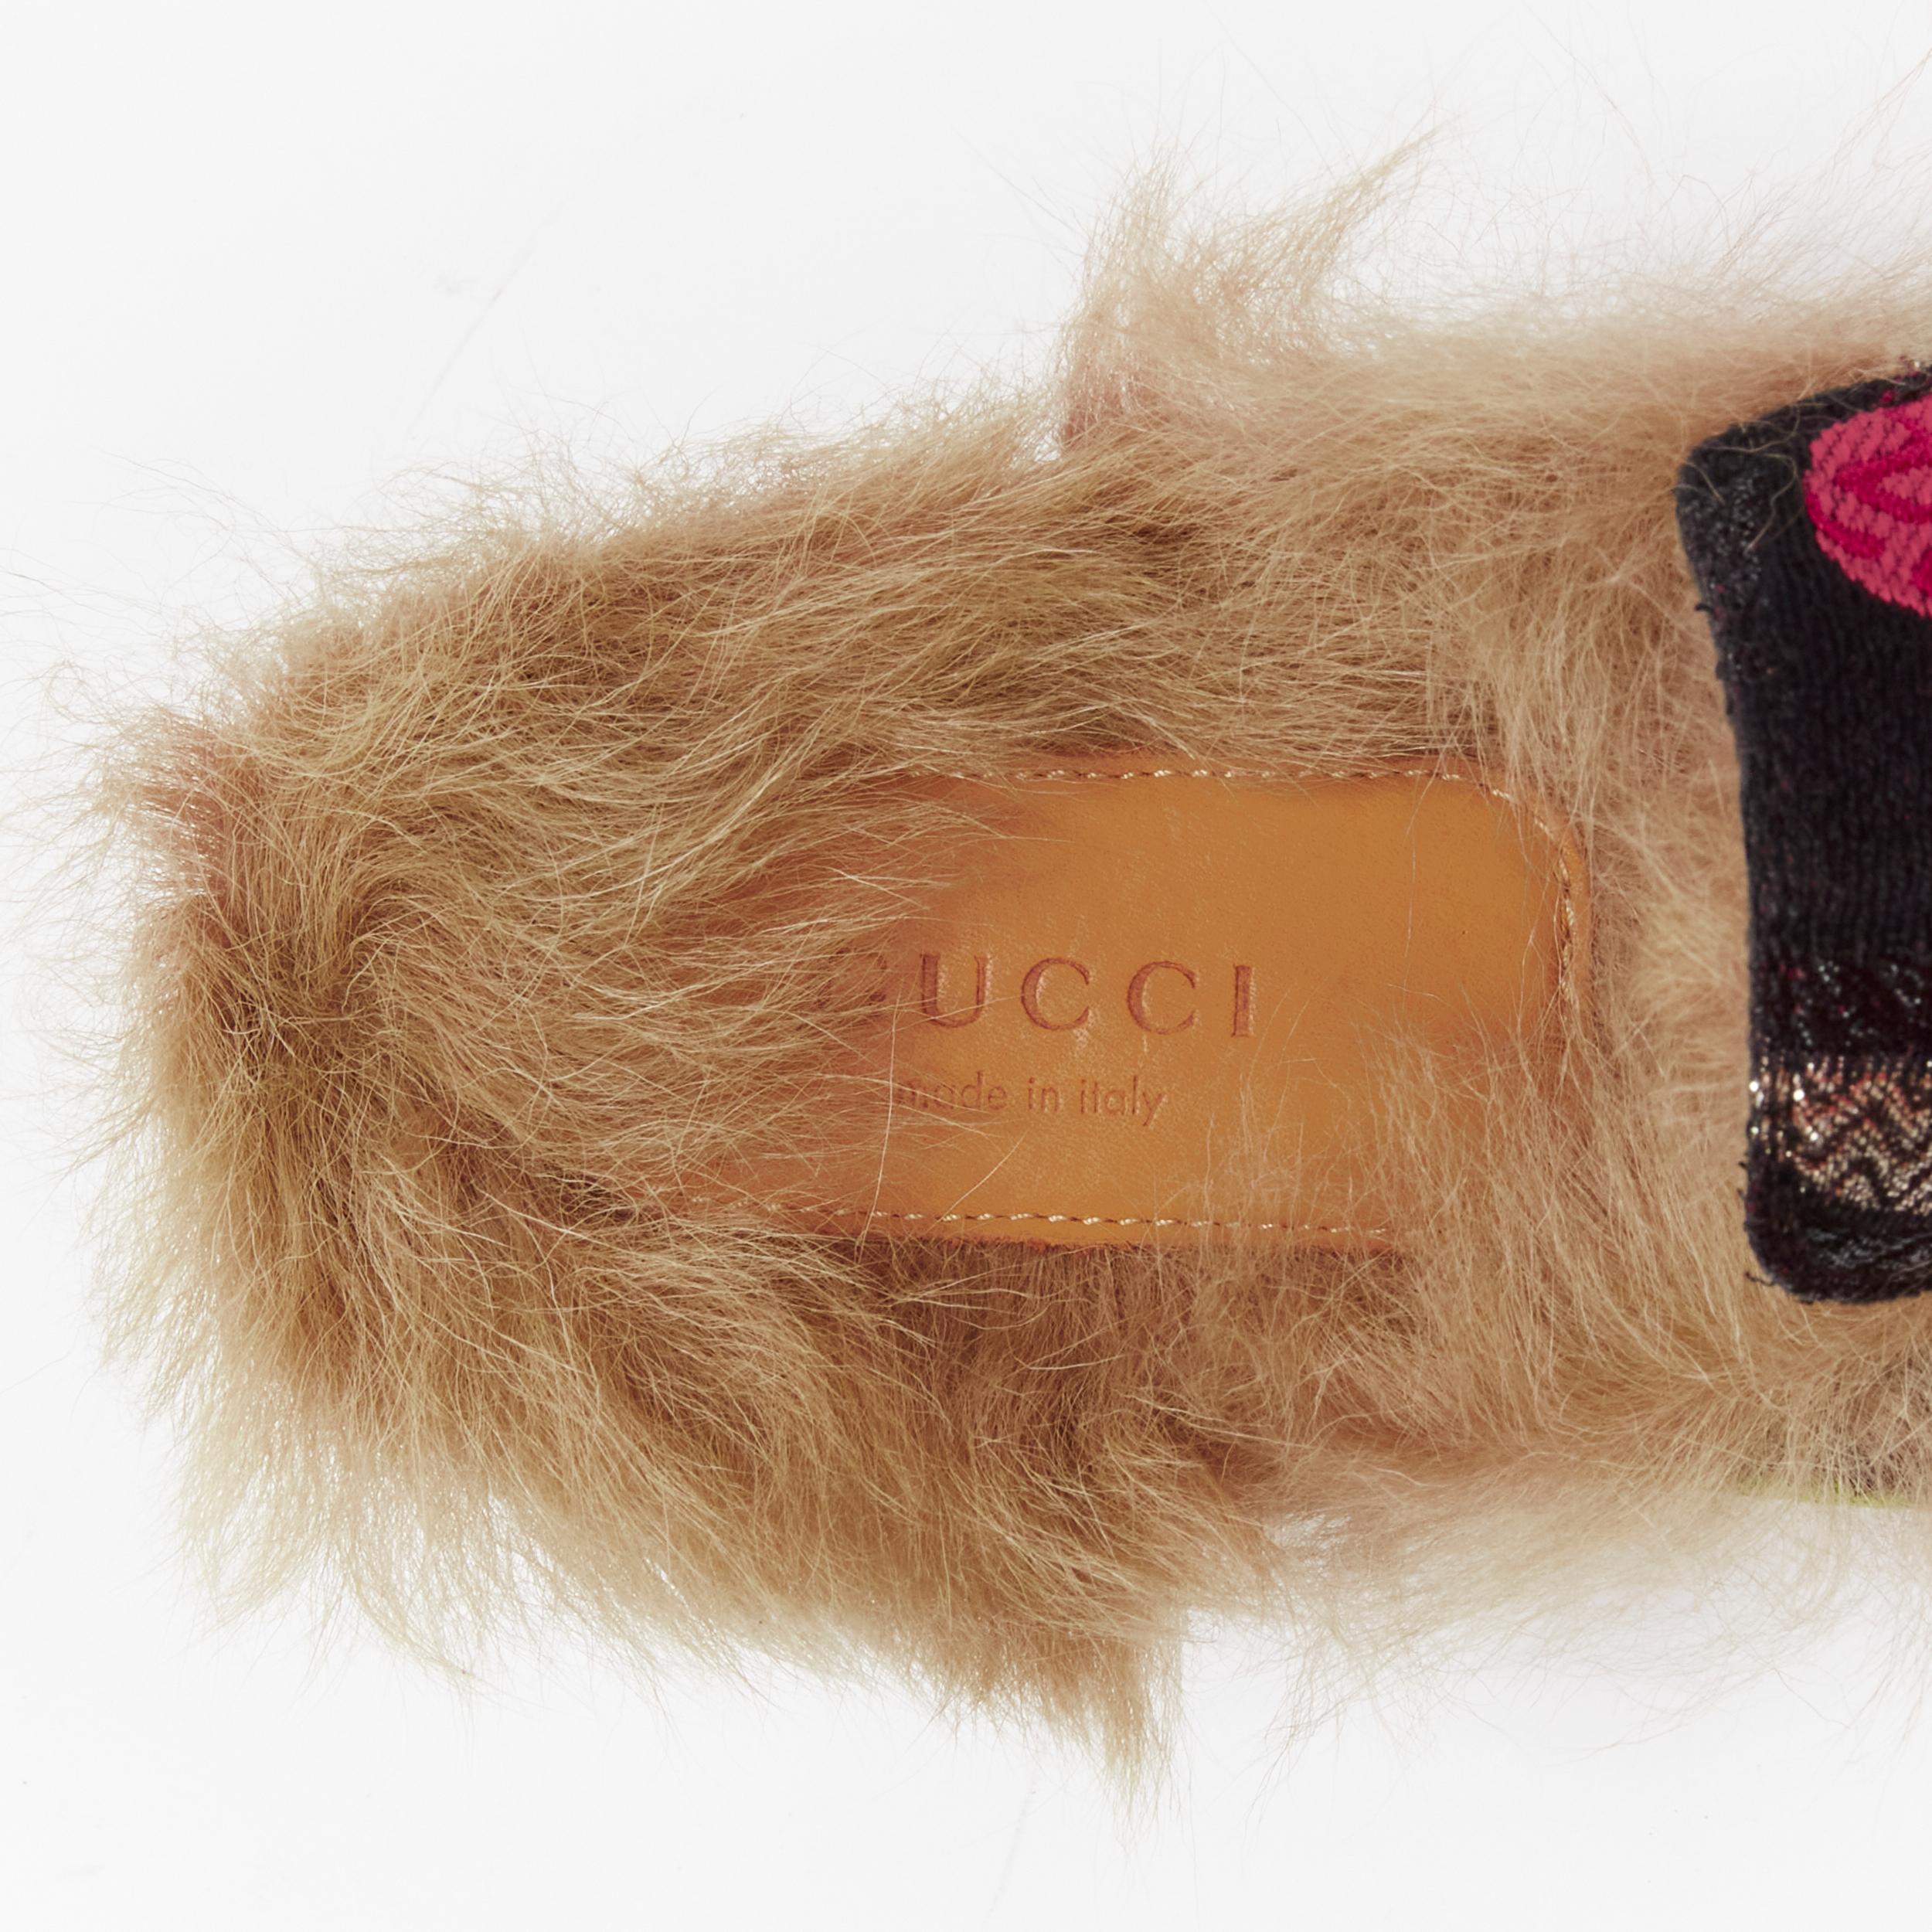 GUCCI Princetown pink floral brocade jacquard fur lined loafer slippers EU37 5